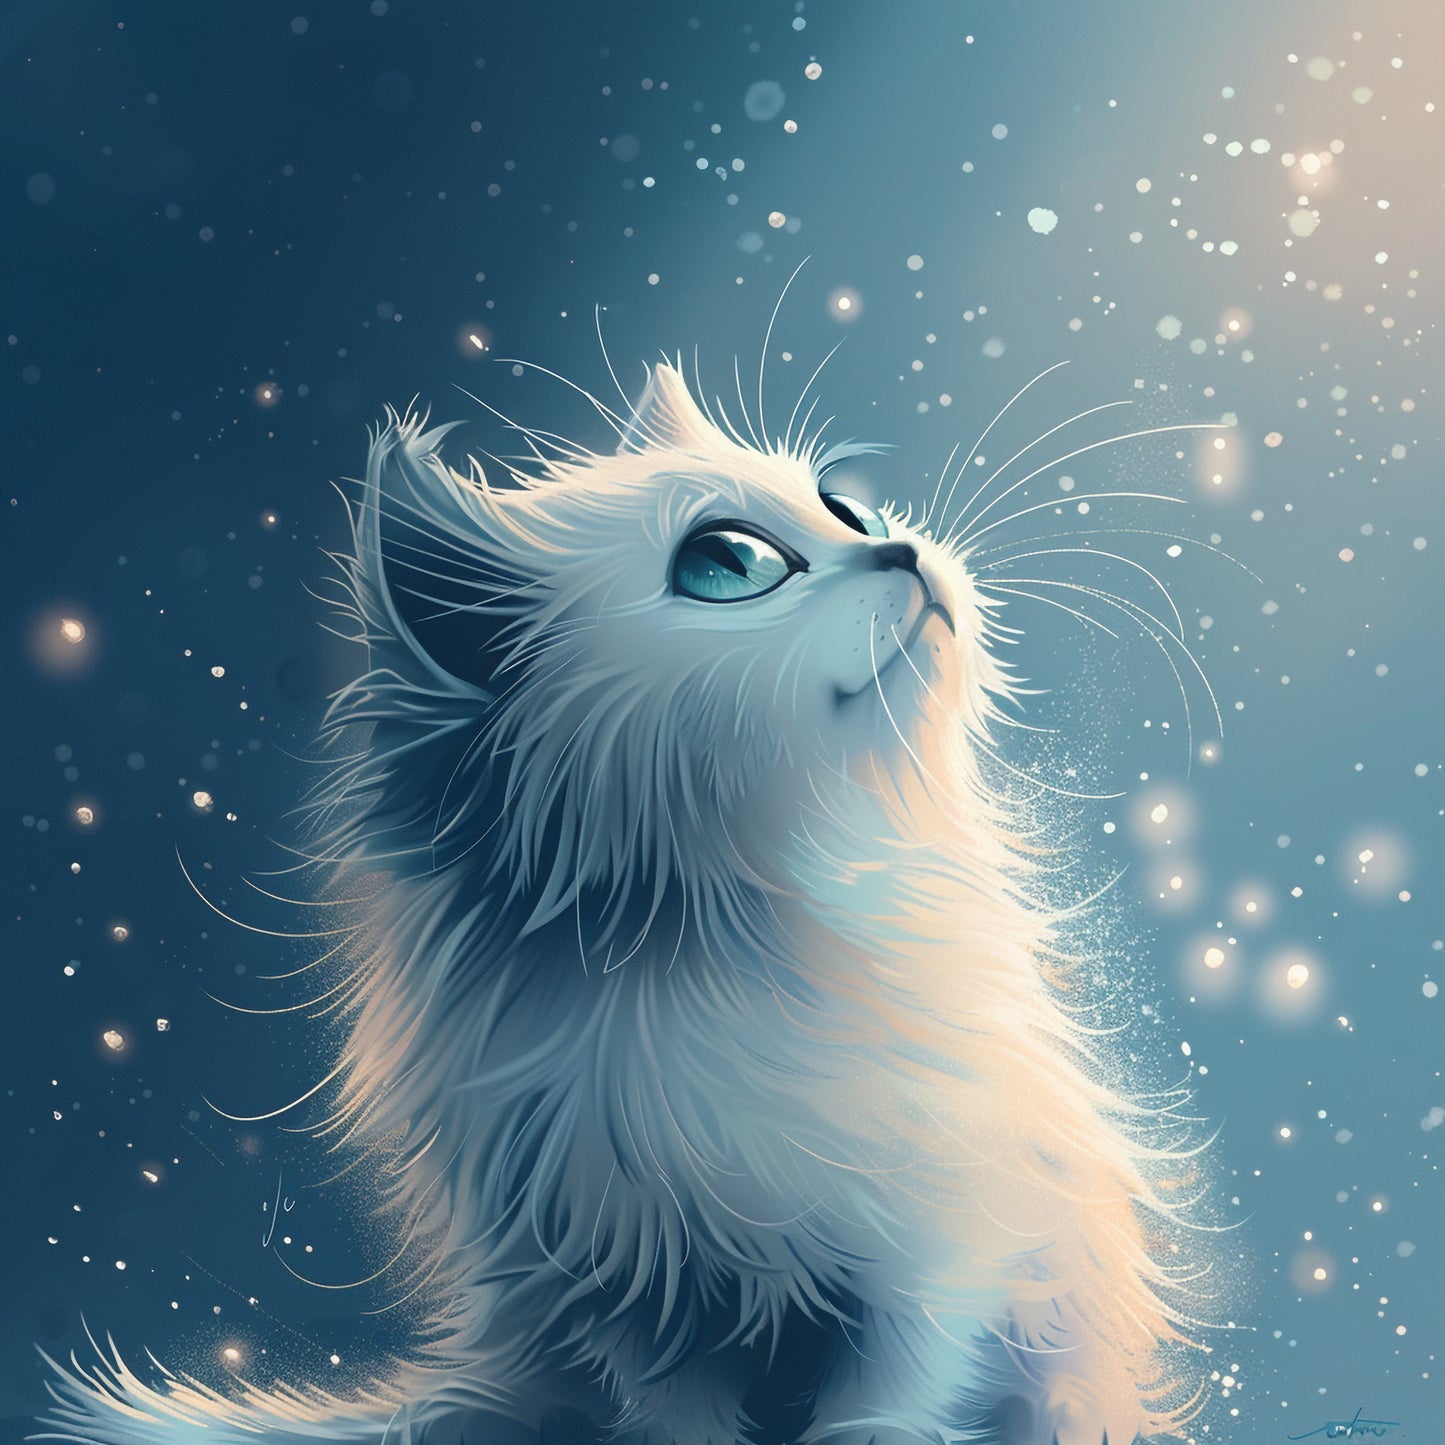 Dreamy Fluffy Kitten Illustration in a Magical Setting